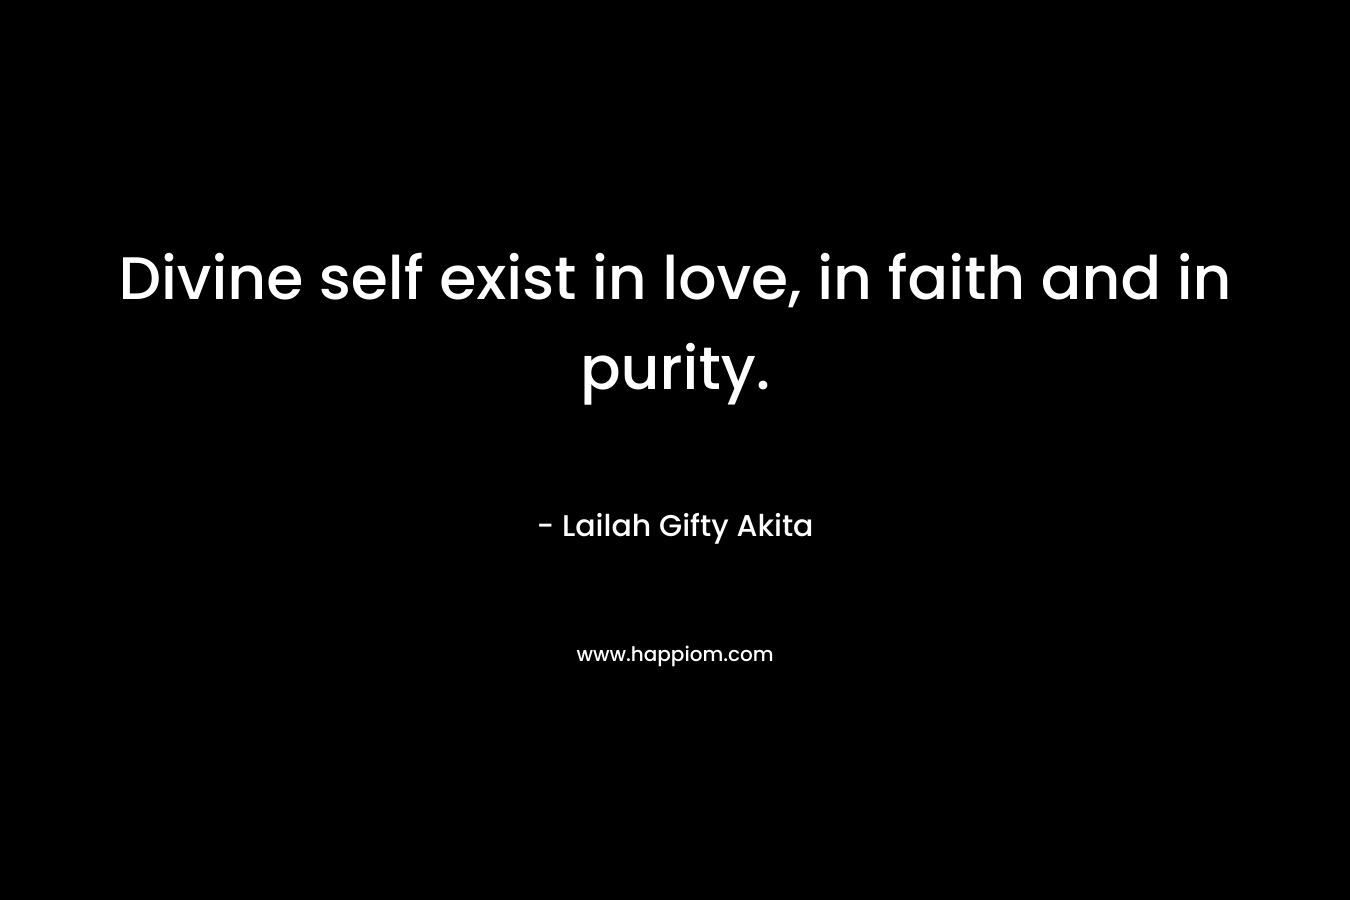 Divine self exist in love, in faith and in purity.